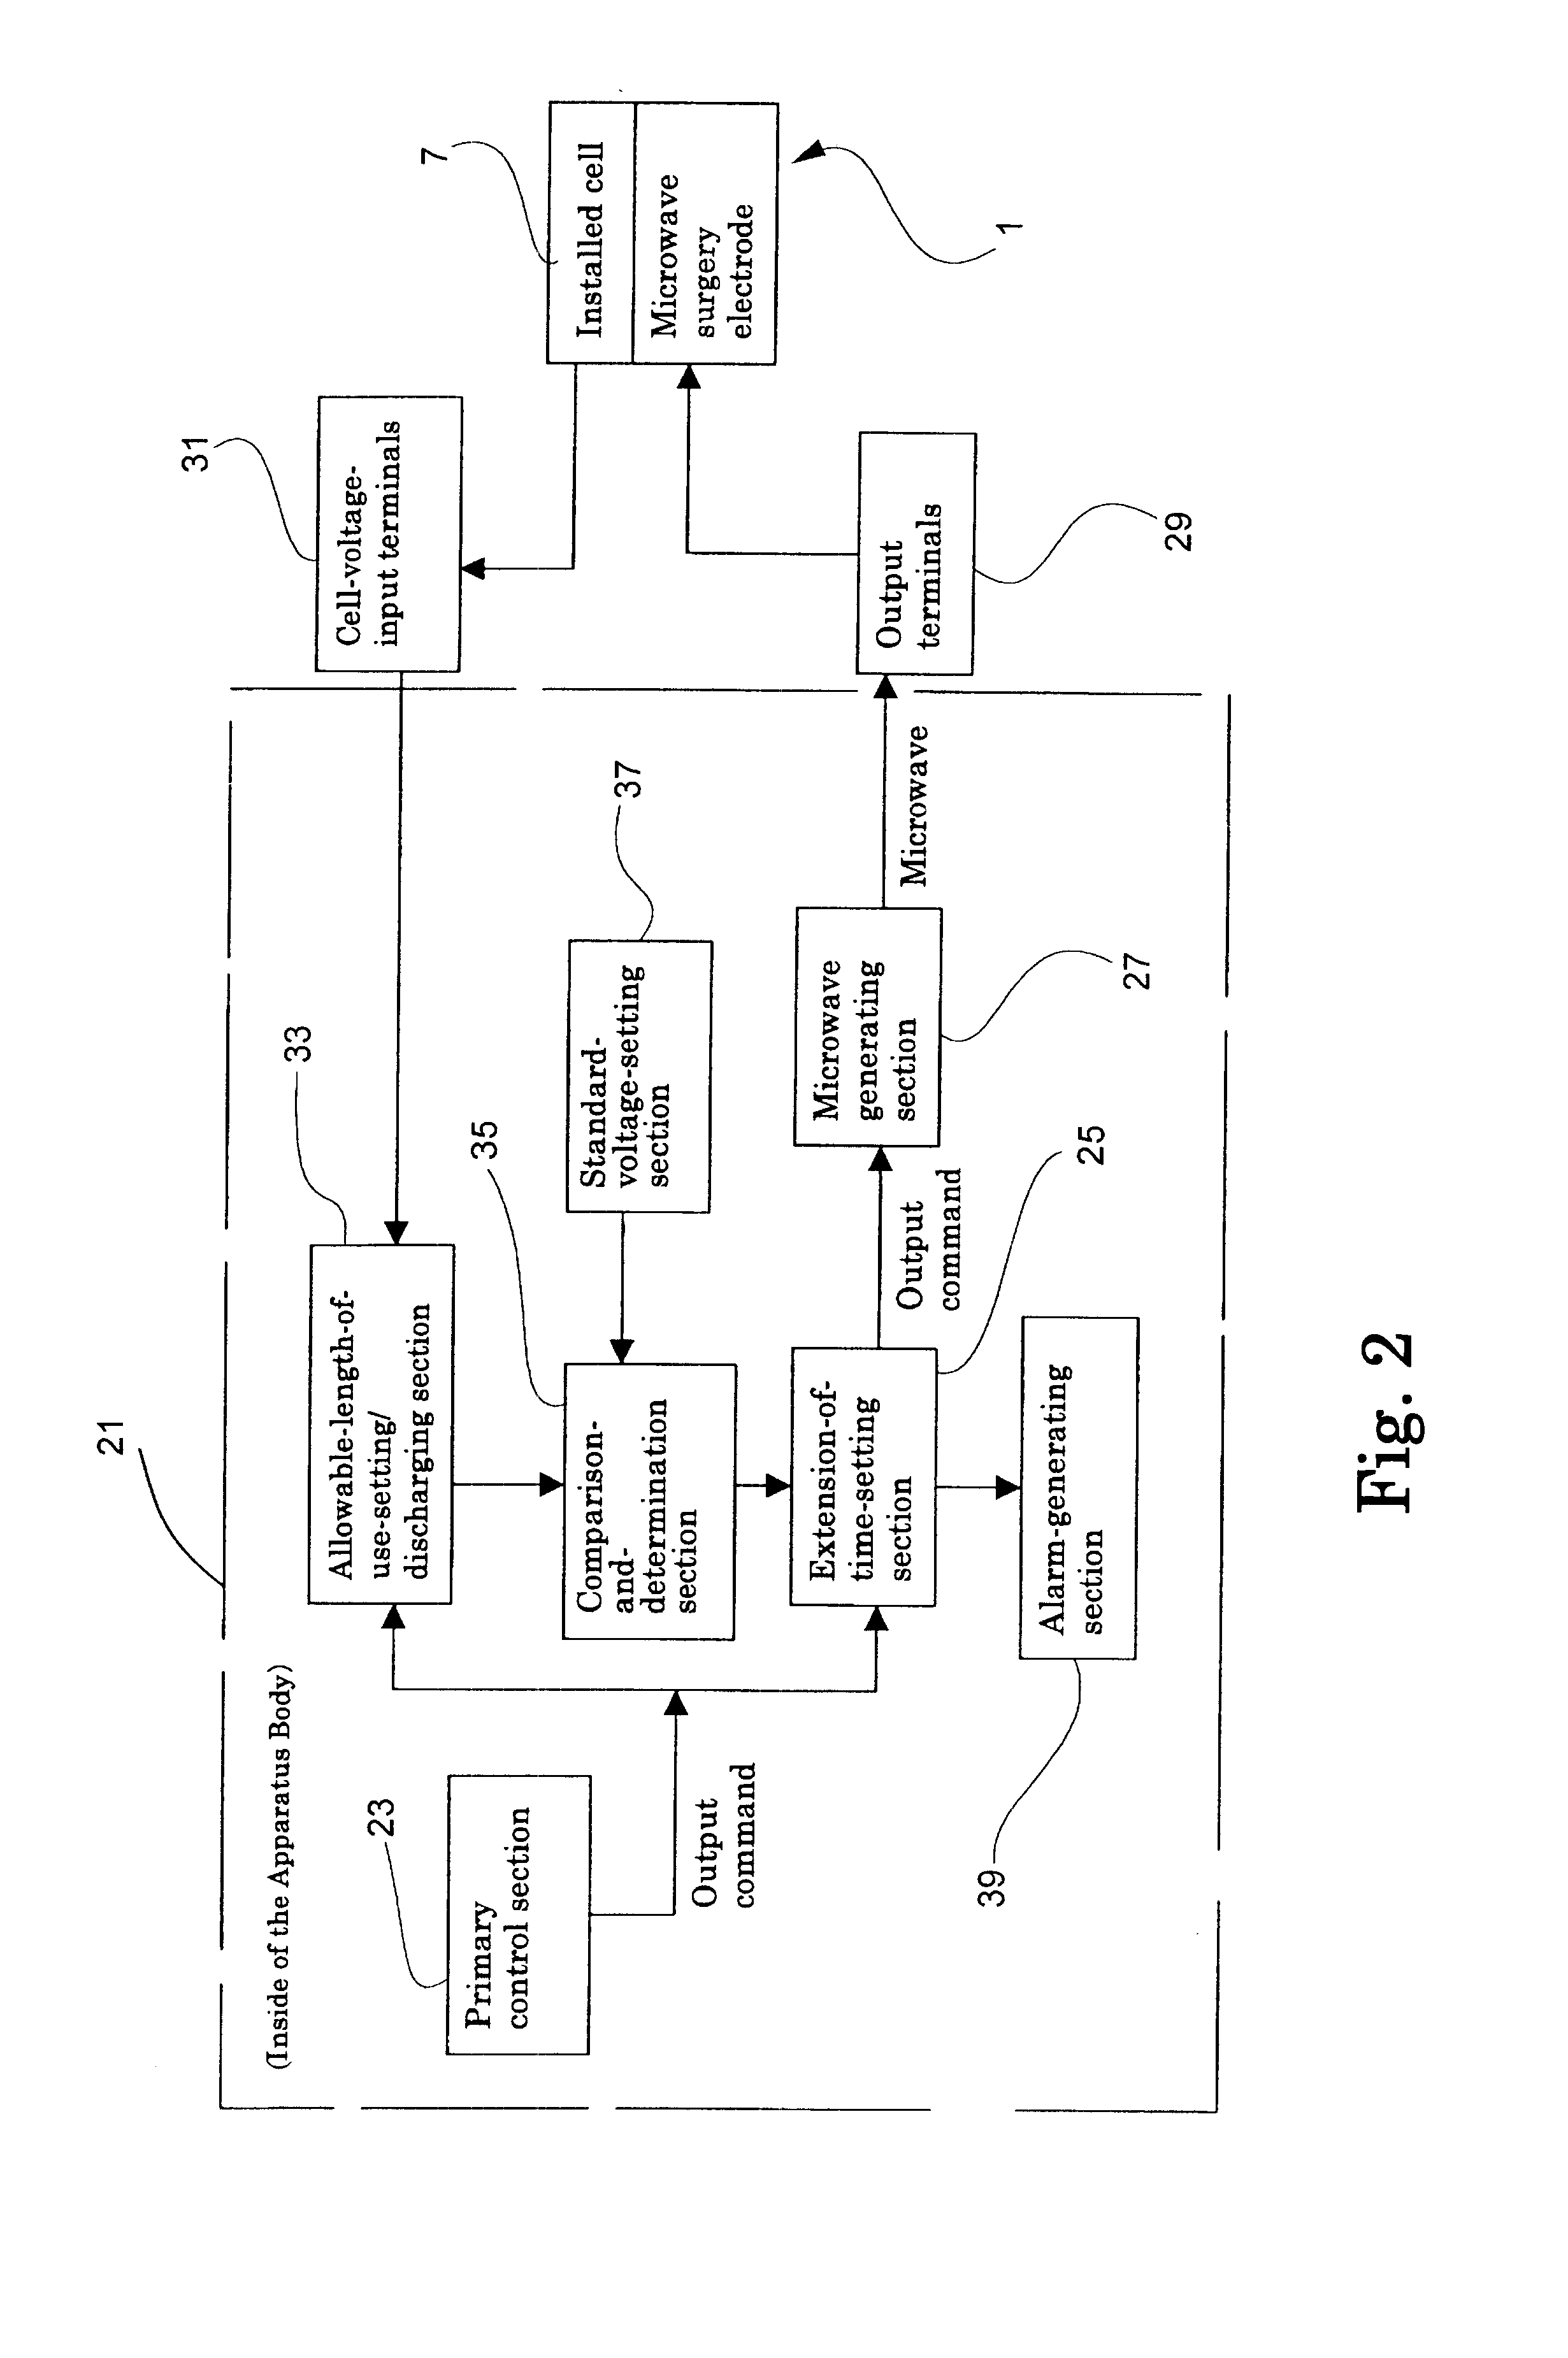 Disposable medical instrument and medical device incorporating the instrument